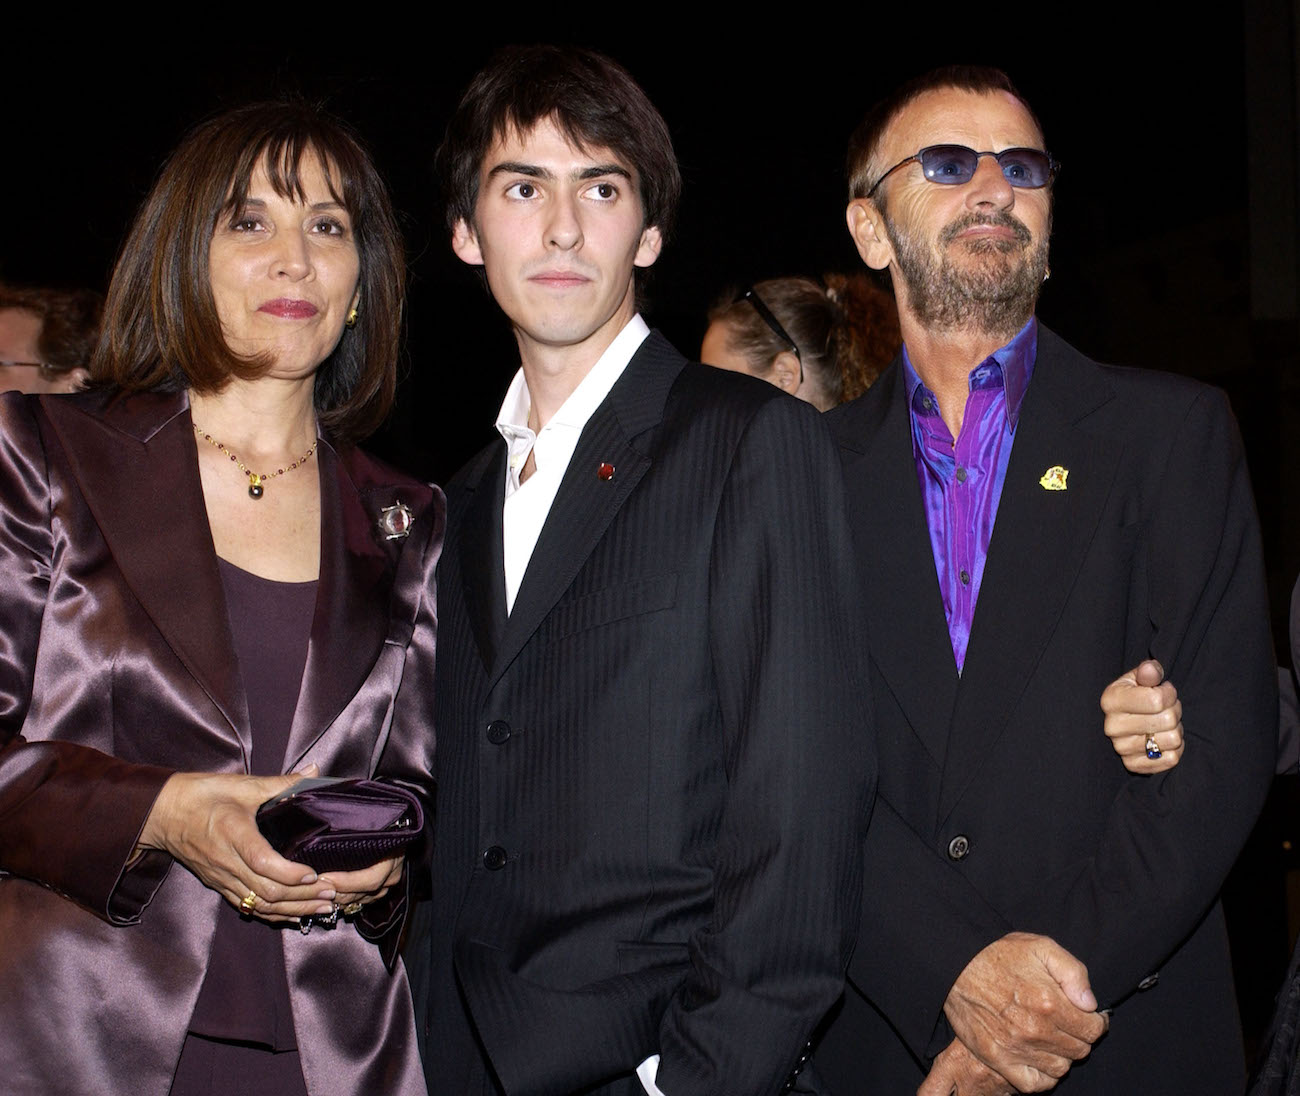 Olivia and Dhani Harrison with Ringo Starr at Concert for George.